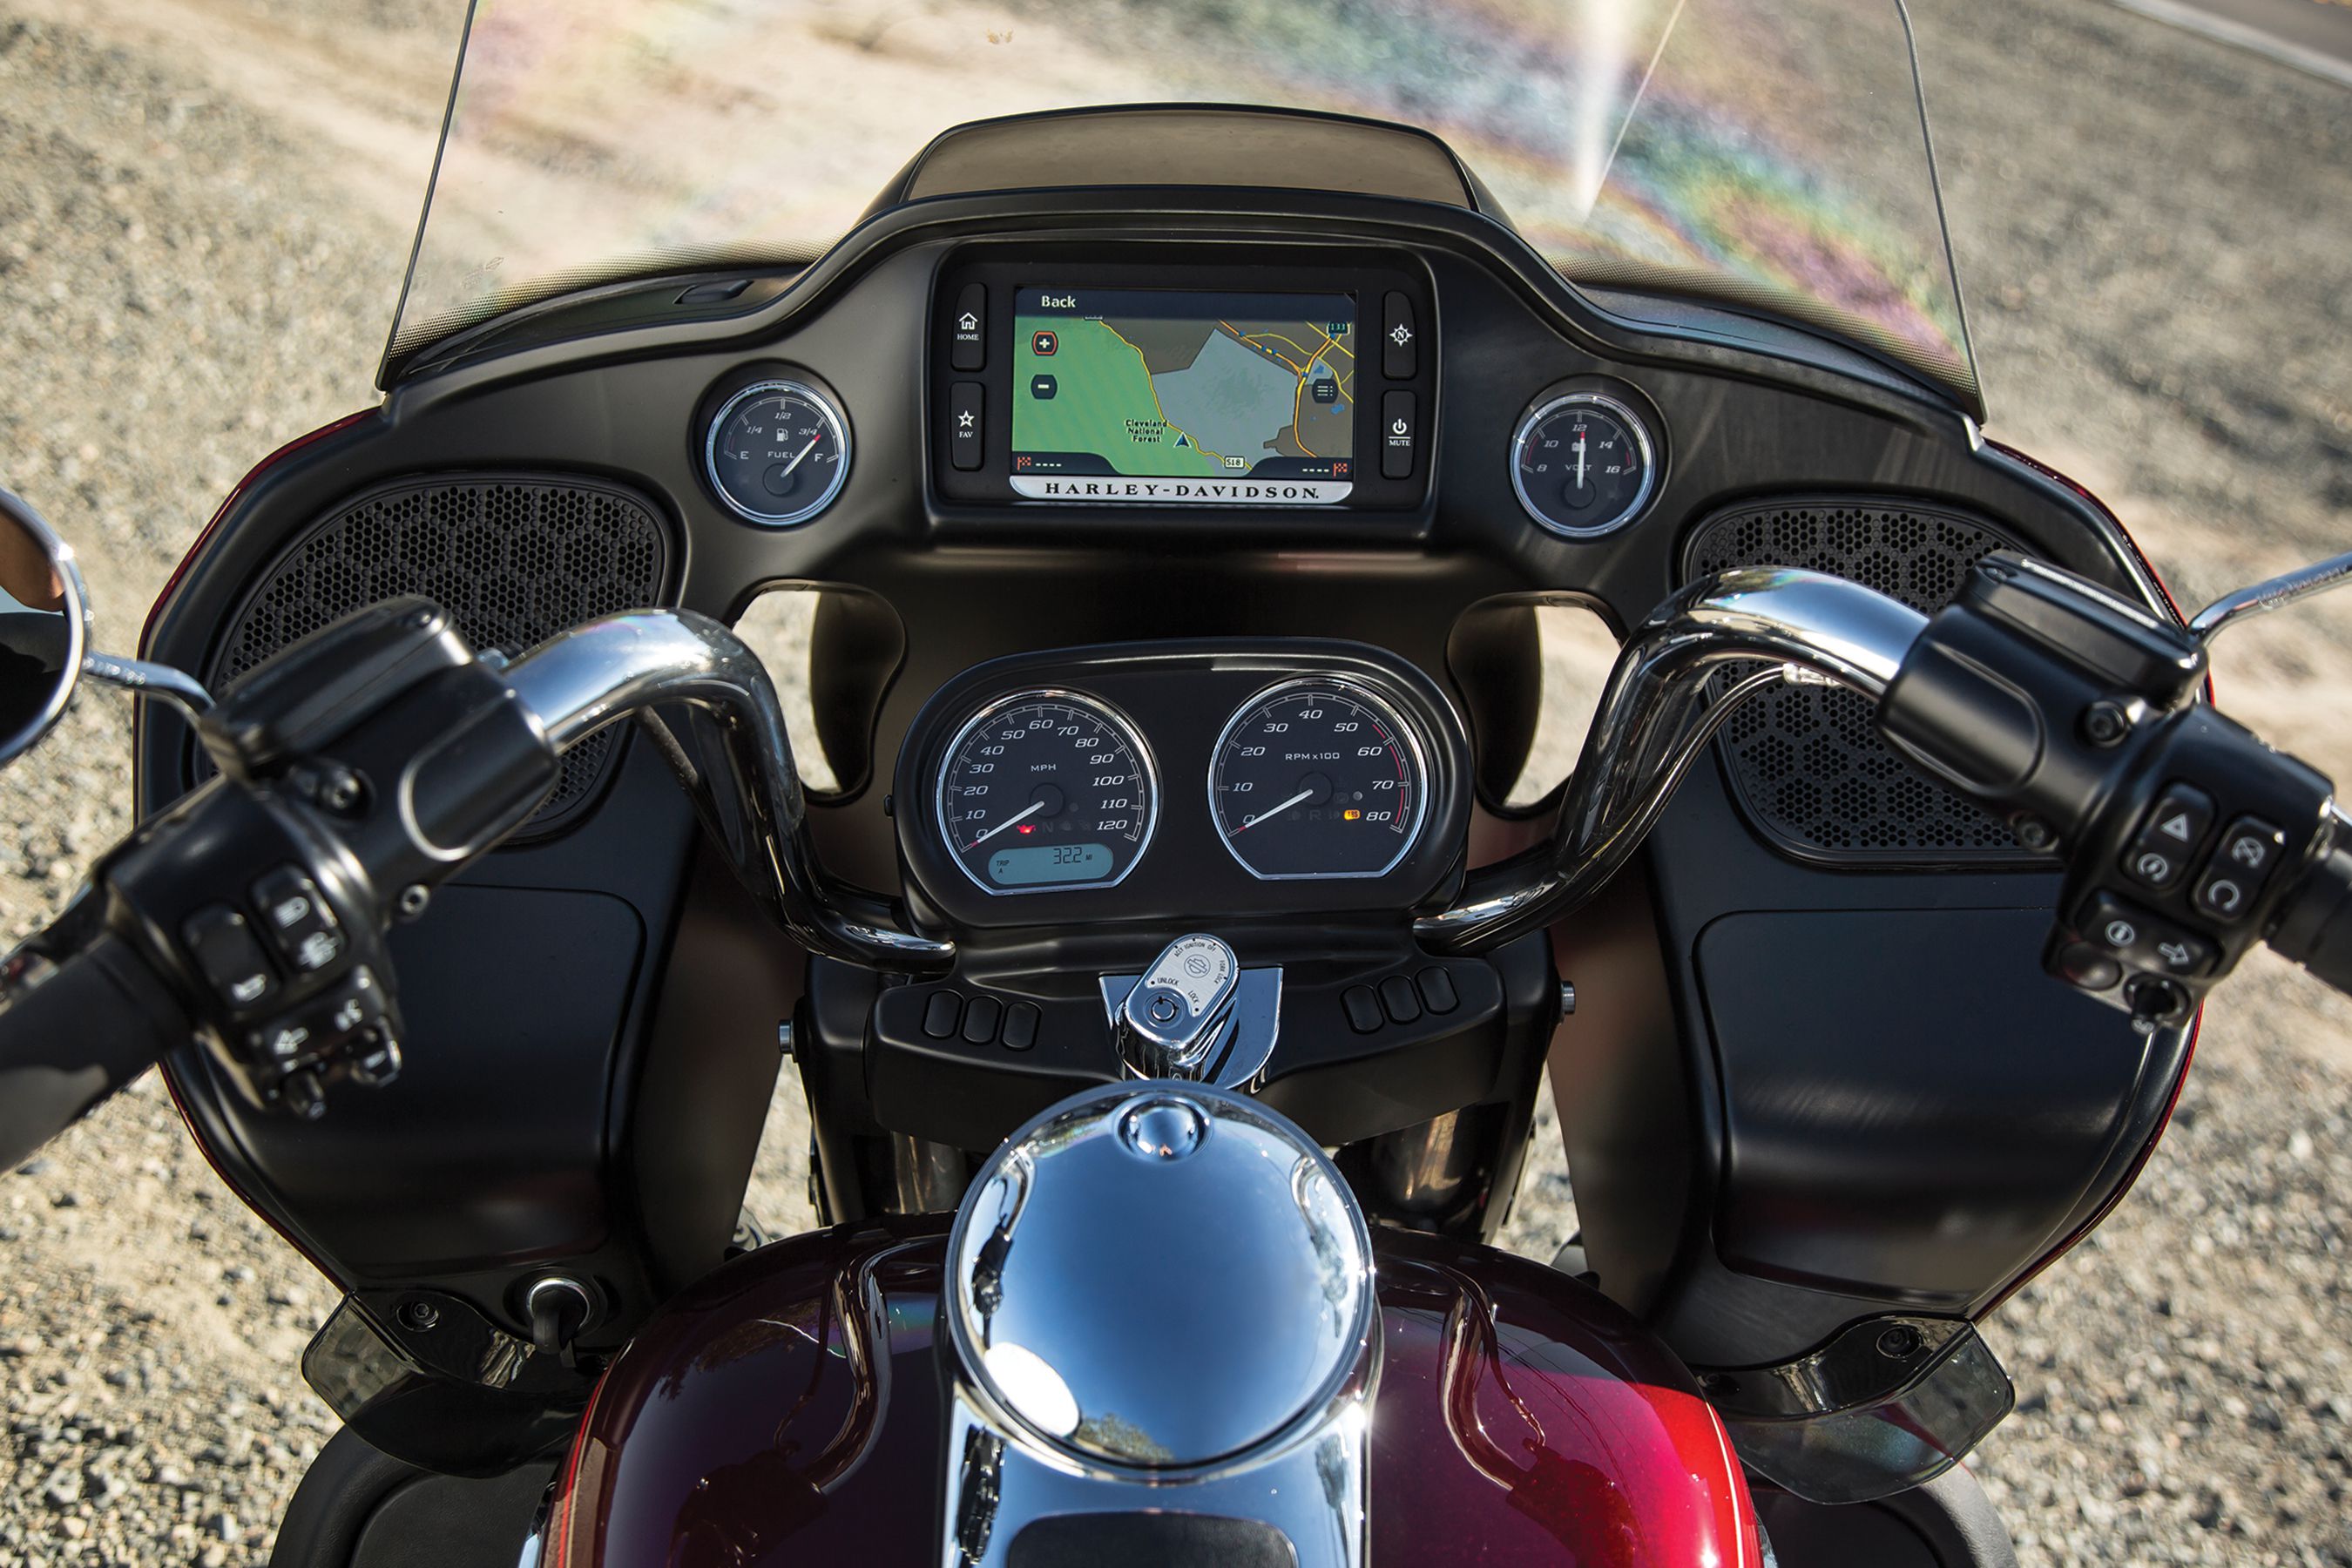 2016 Harley Davidson Road Glide Ultra Review | Motorcyclist